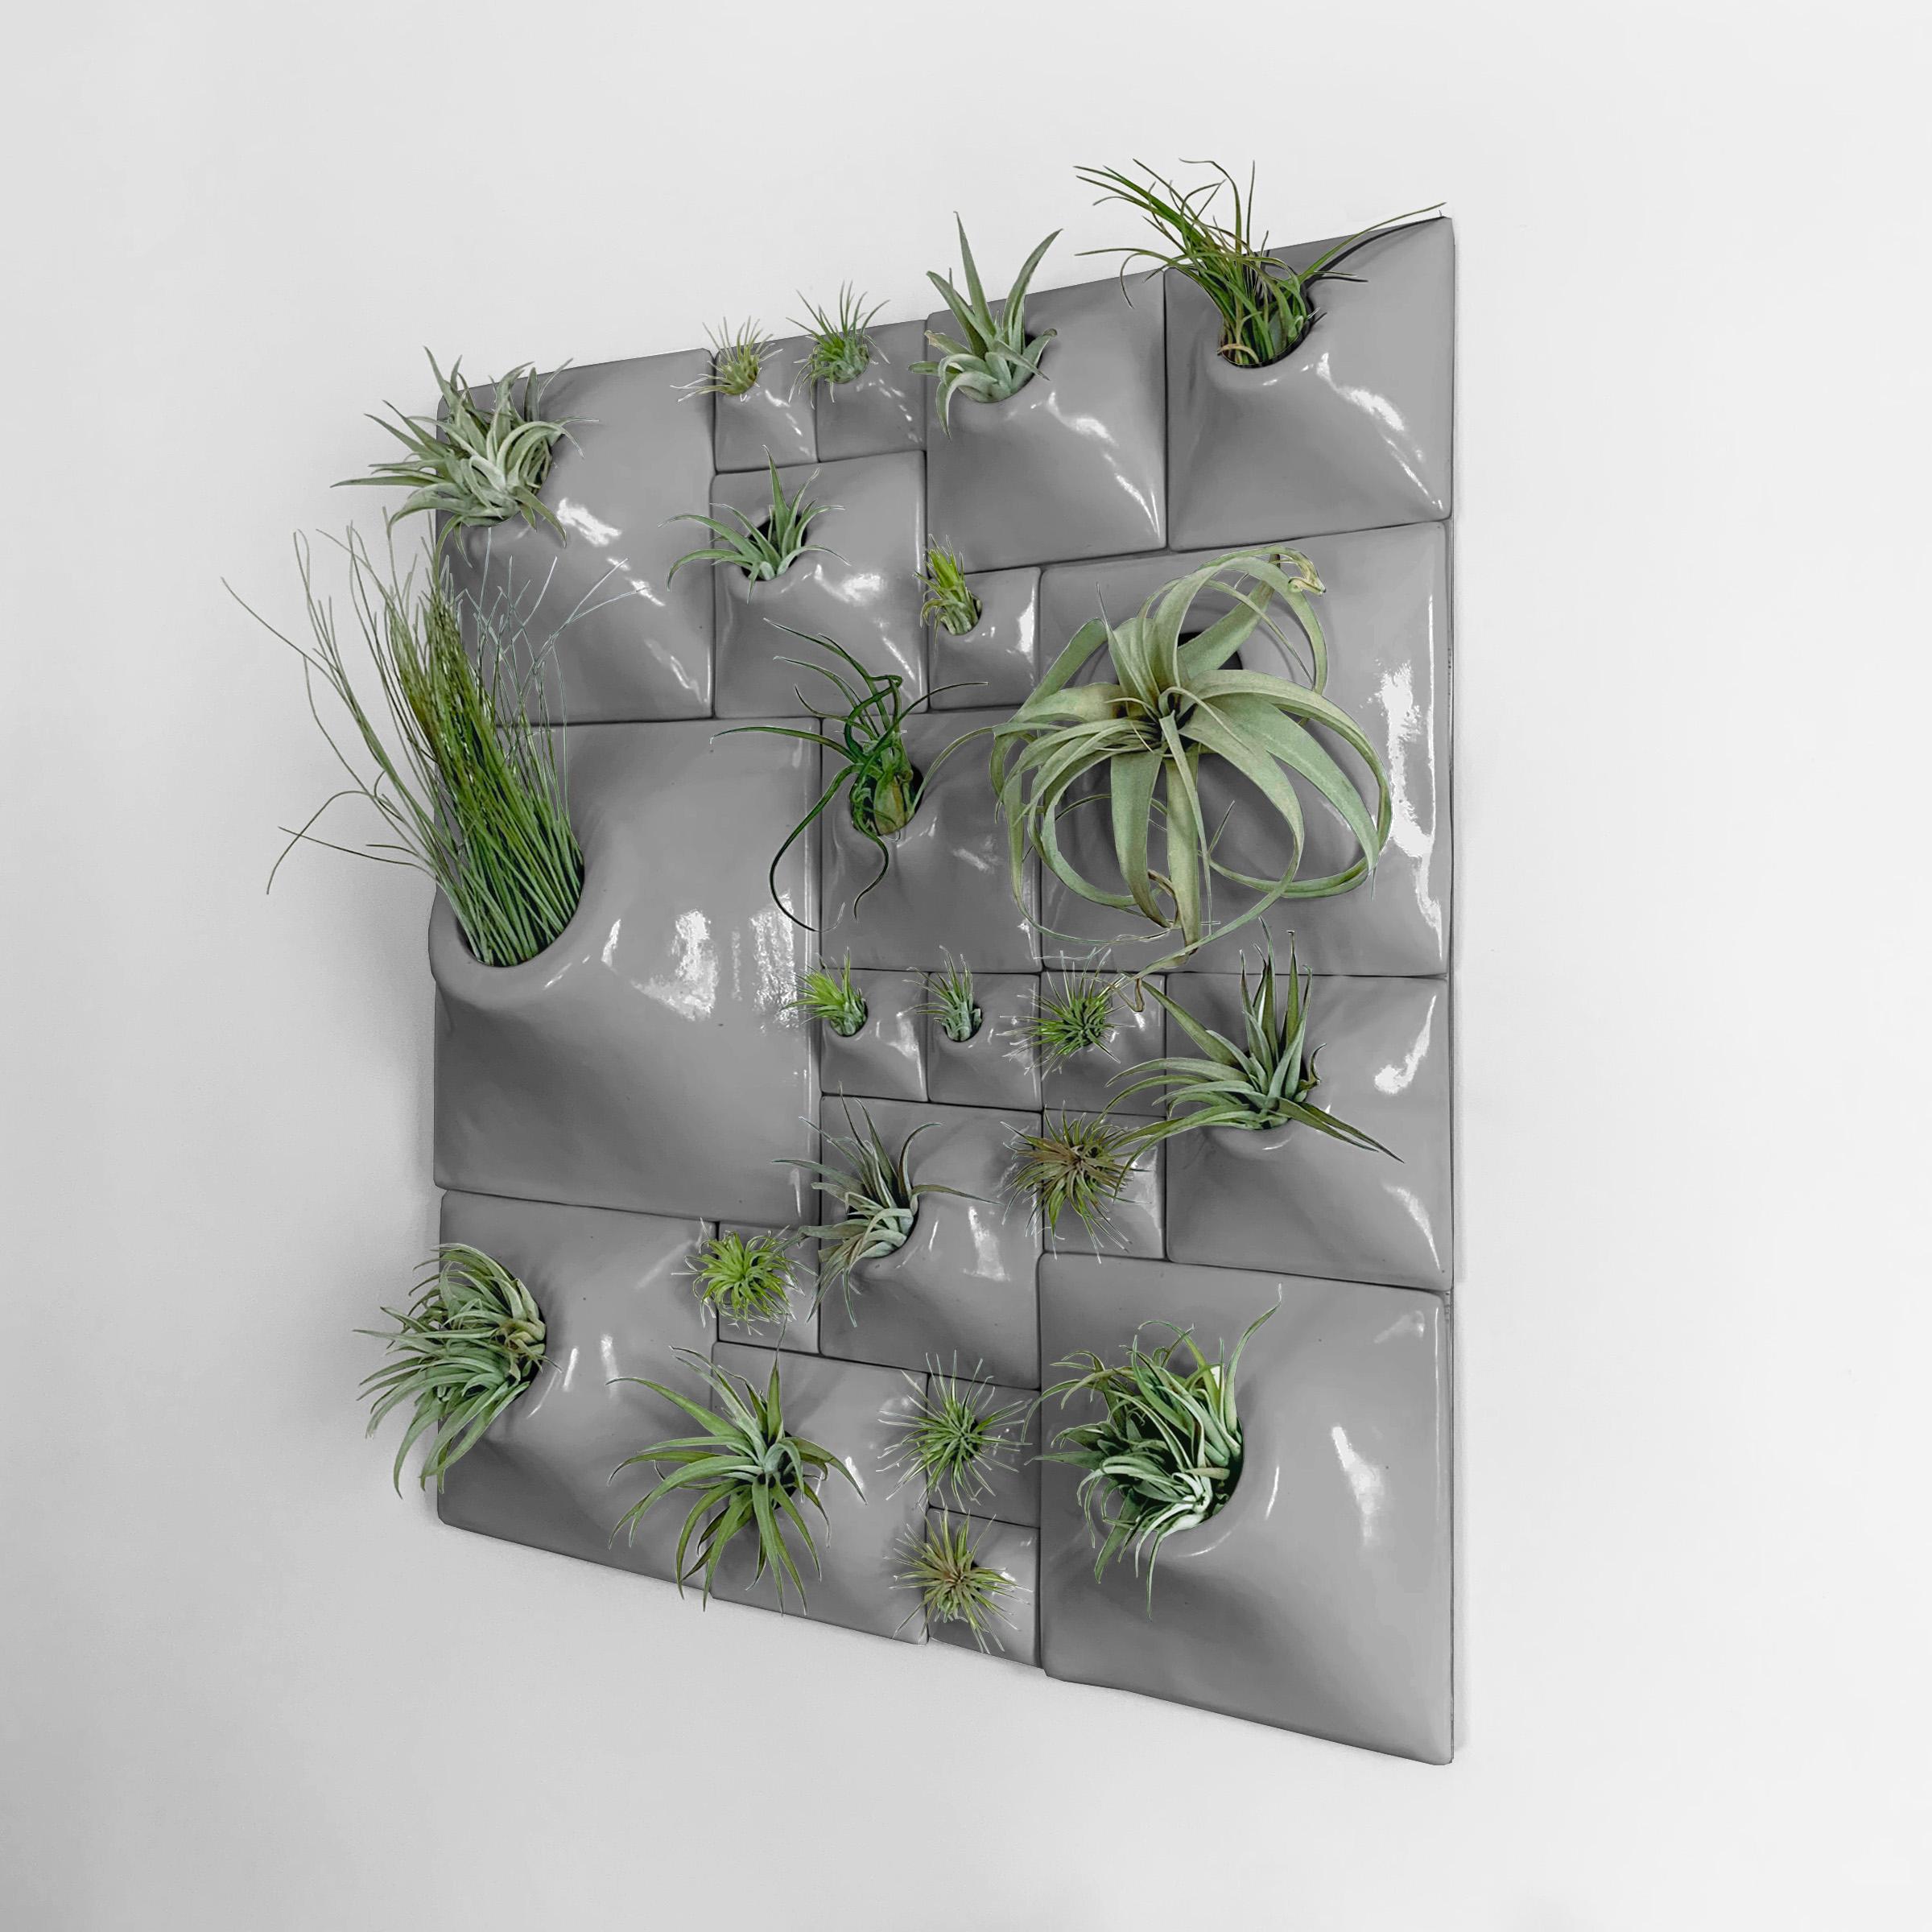 Modern Greenwall Sculpture, Plant Wall Art, Biophilic Wall Decor, Price / Sq Ft For Sale 4